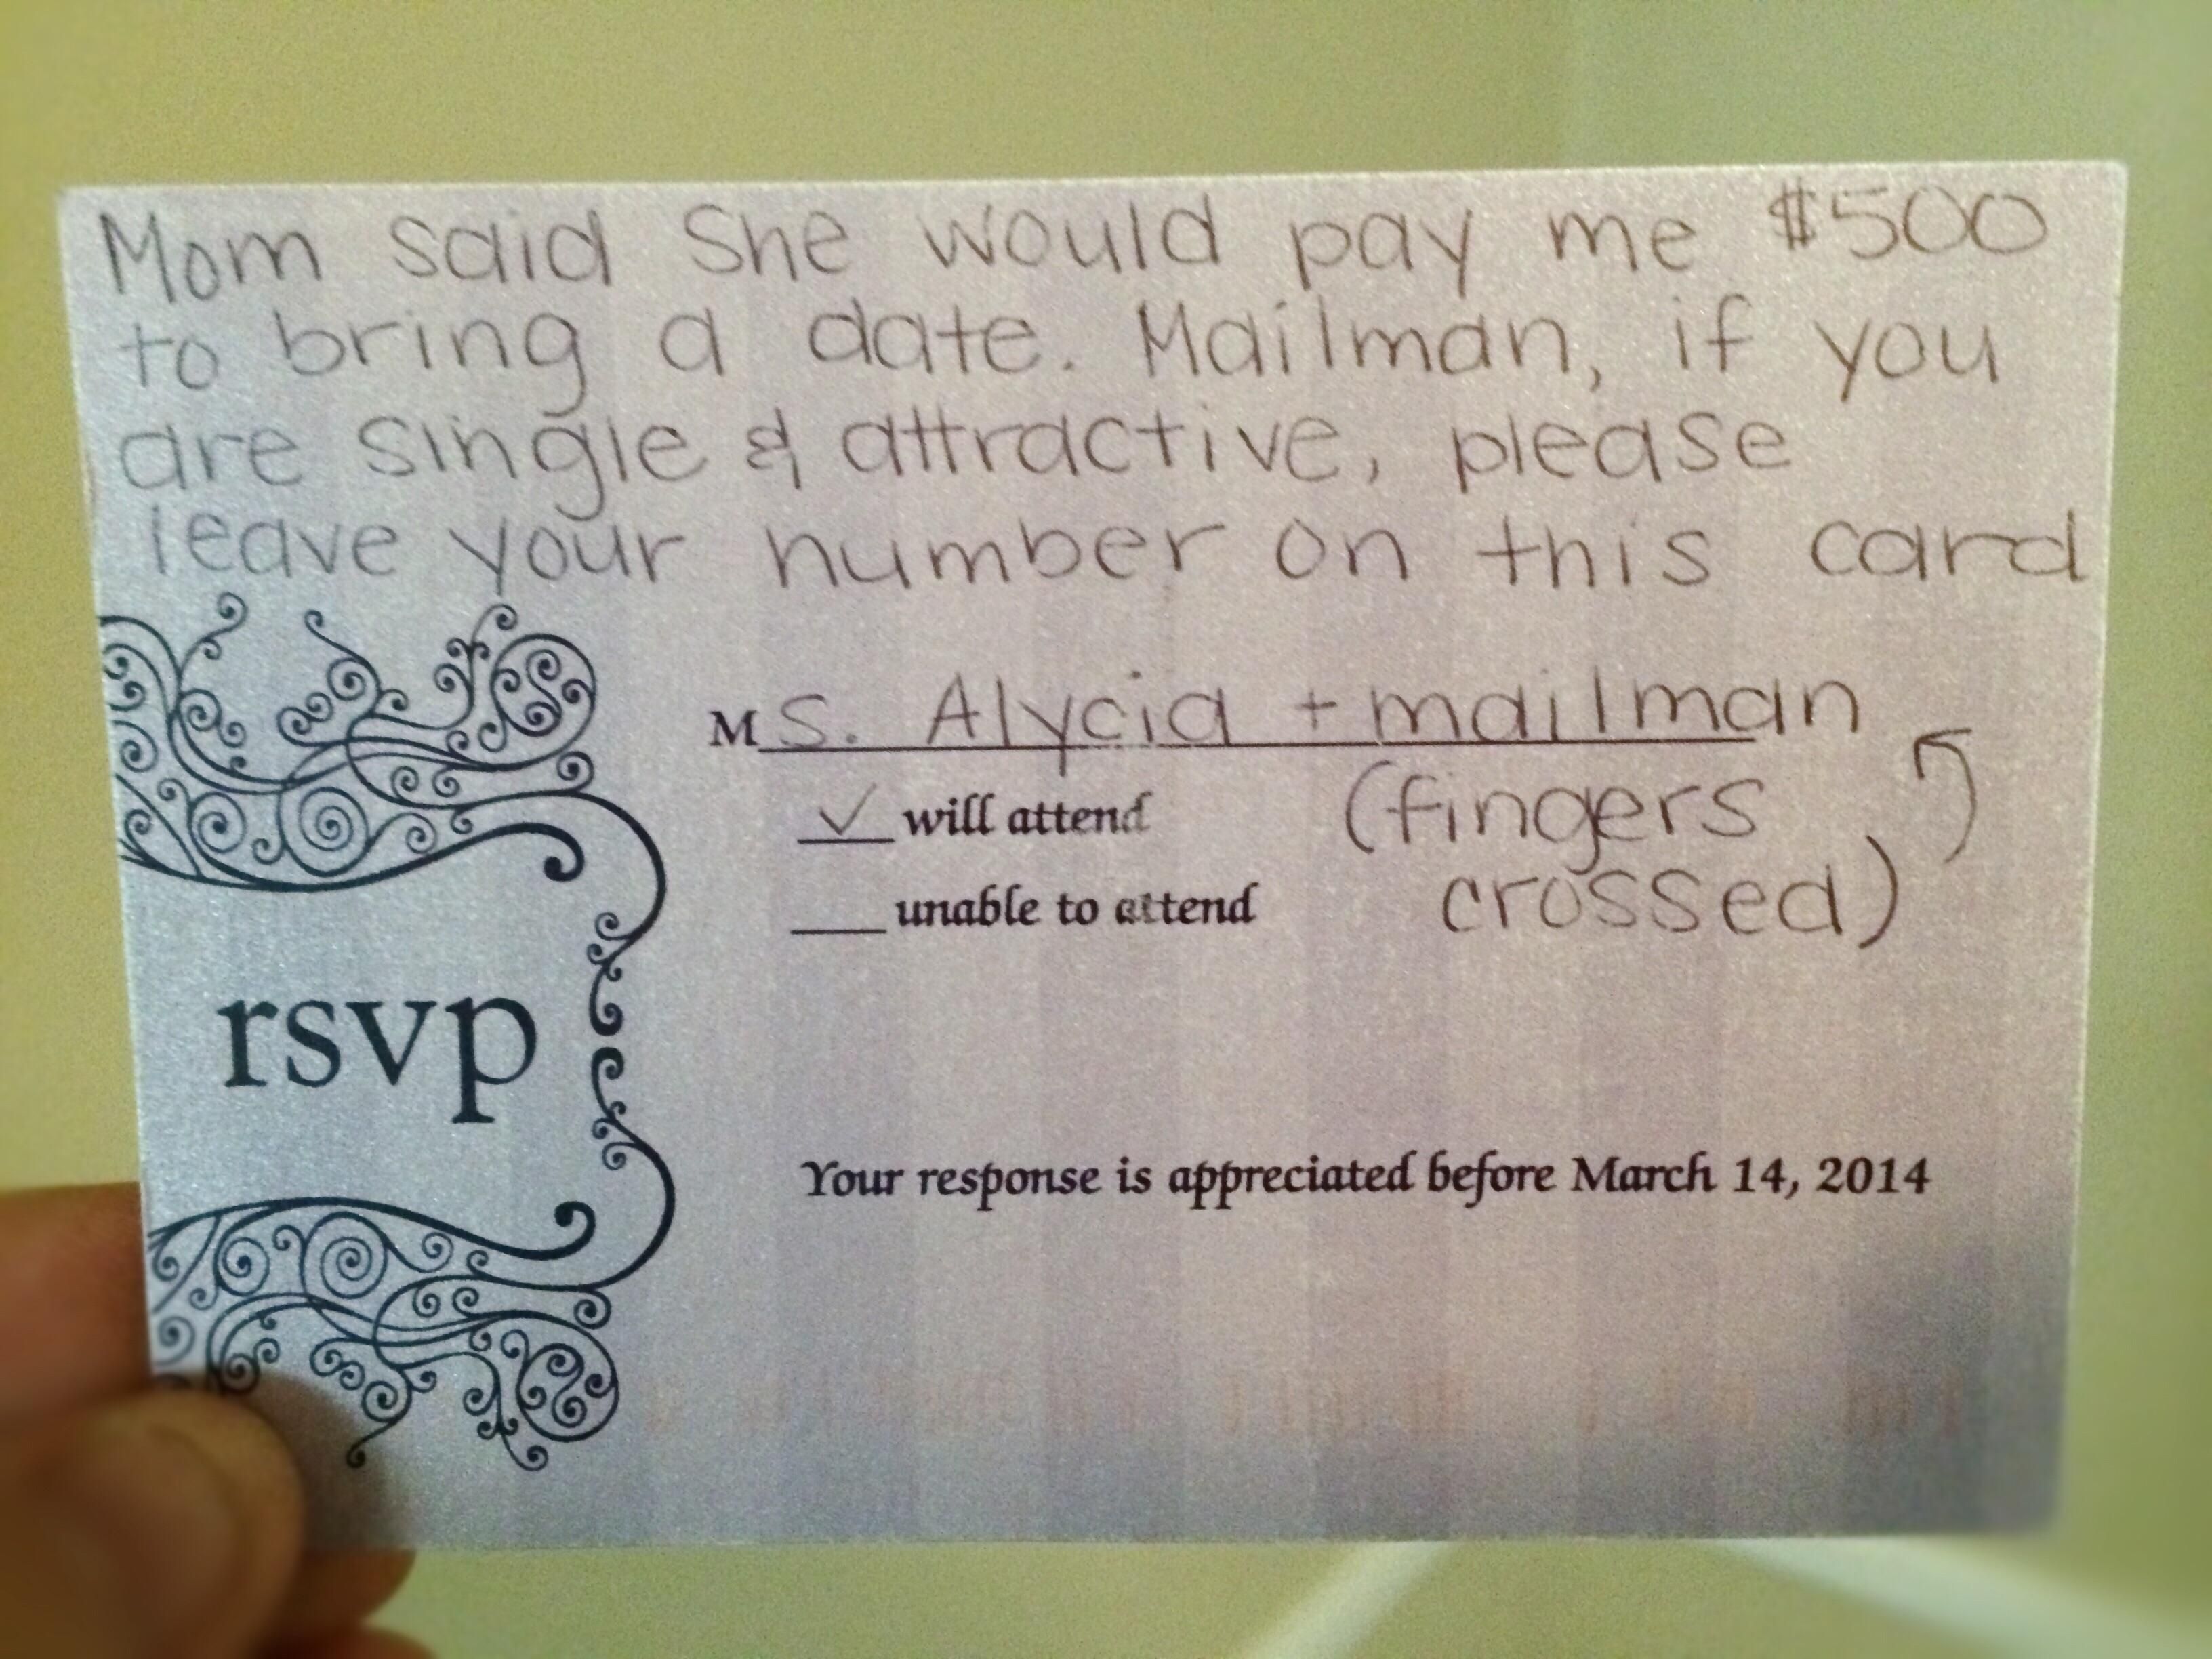 I was cleaning my photo album up and found my little sisters RSVP to my wedding.